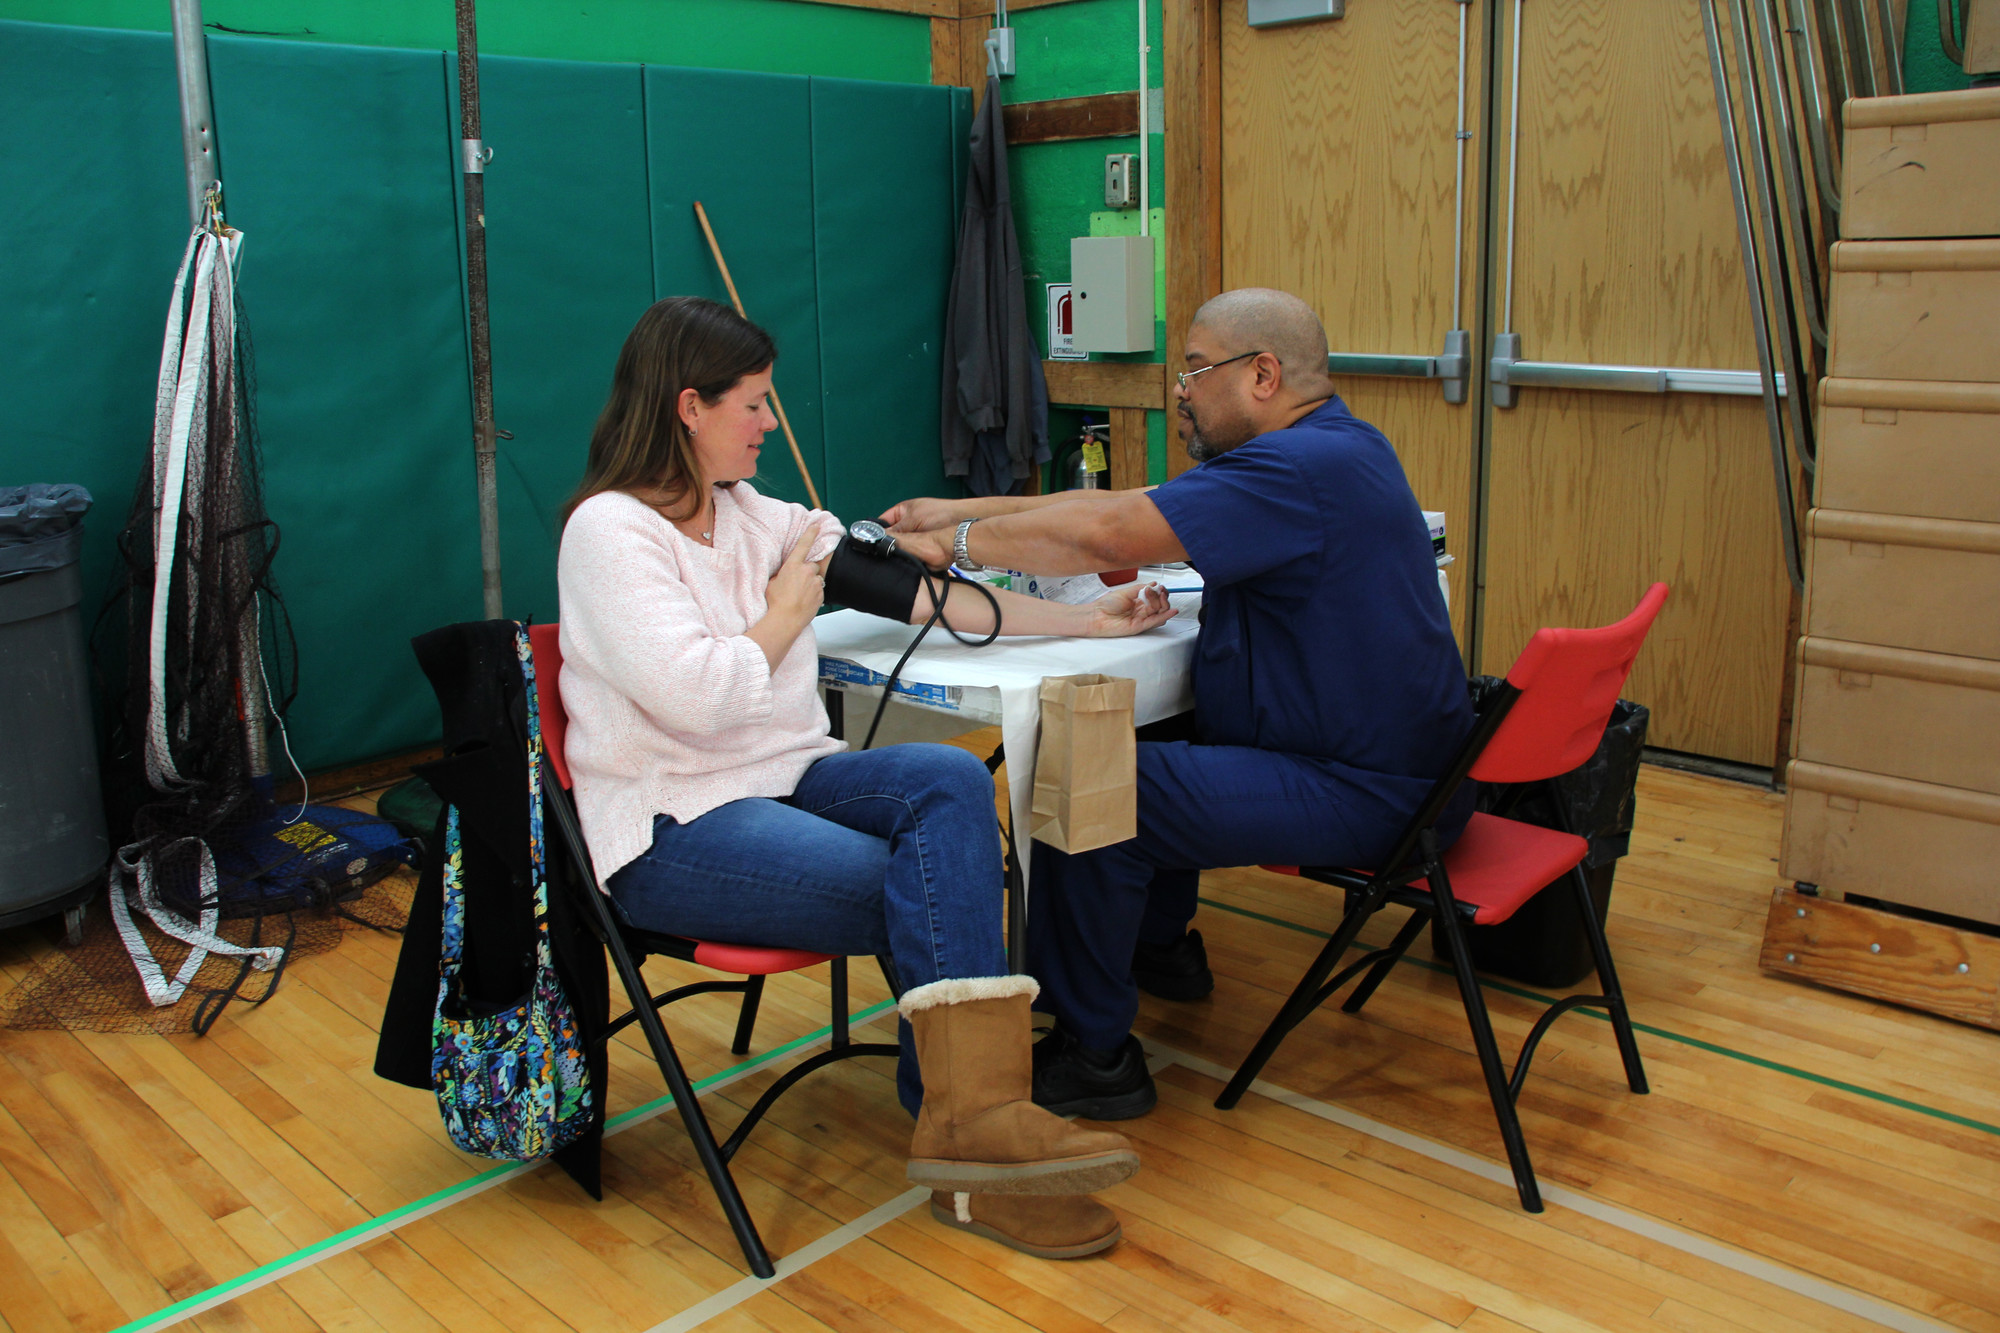 Lori Foote had her vital signs checked by Patrick Williams of the American Red Cross.